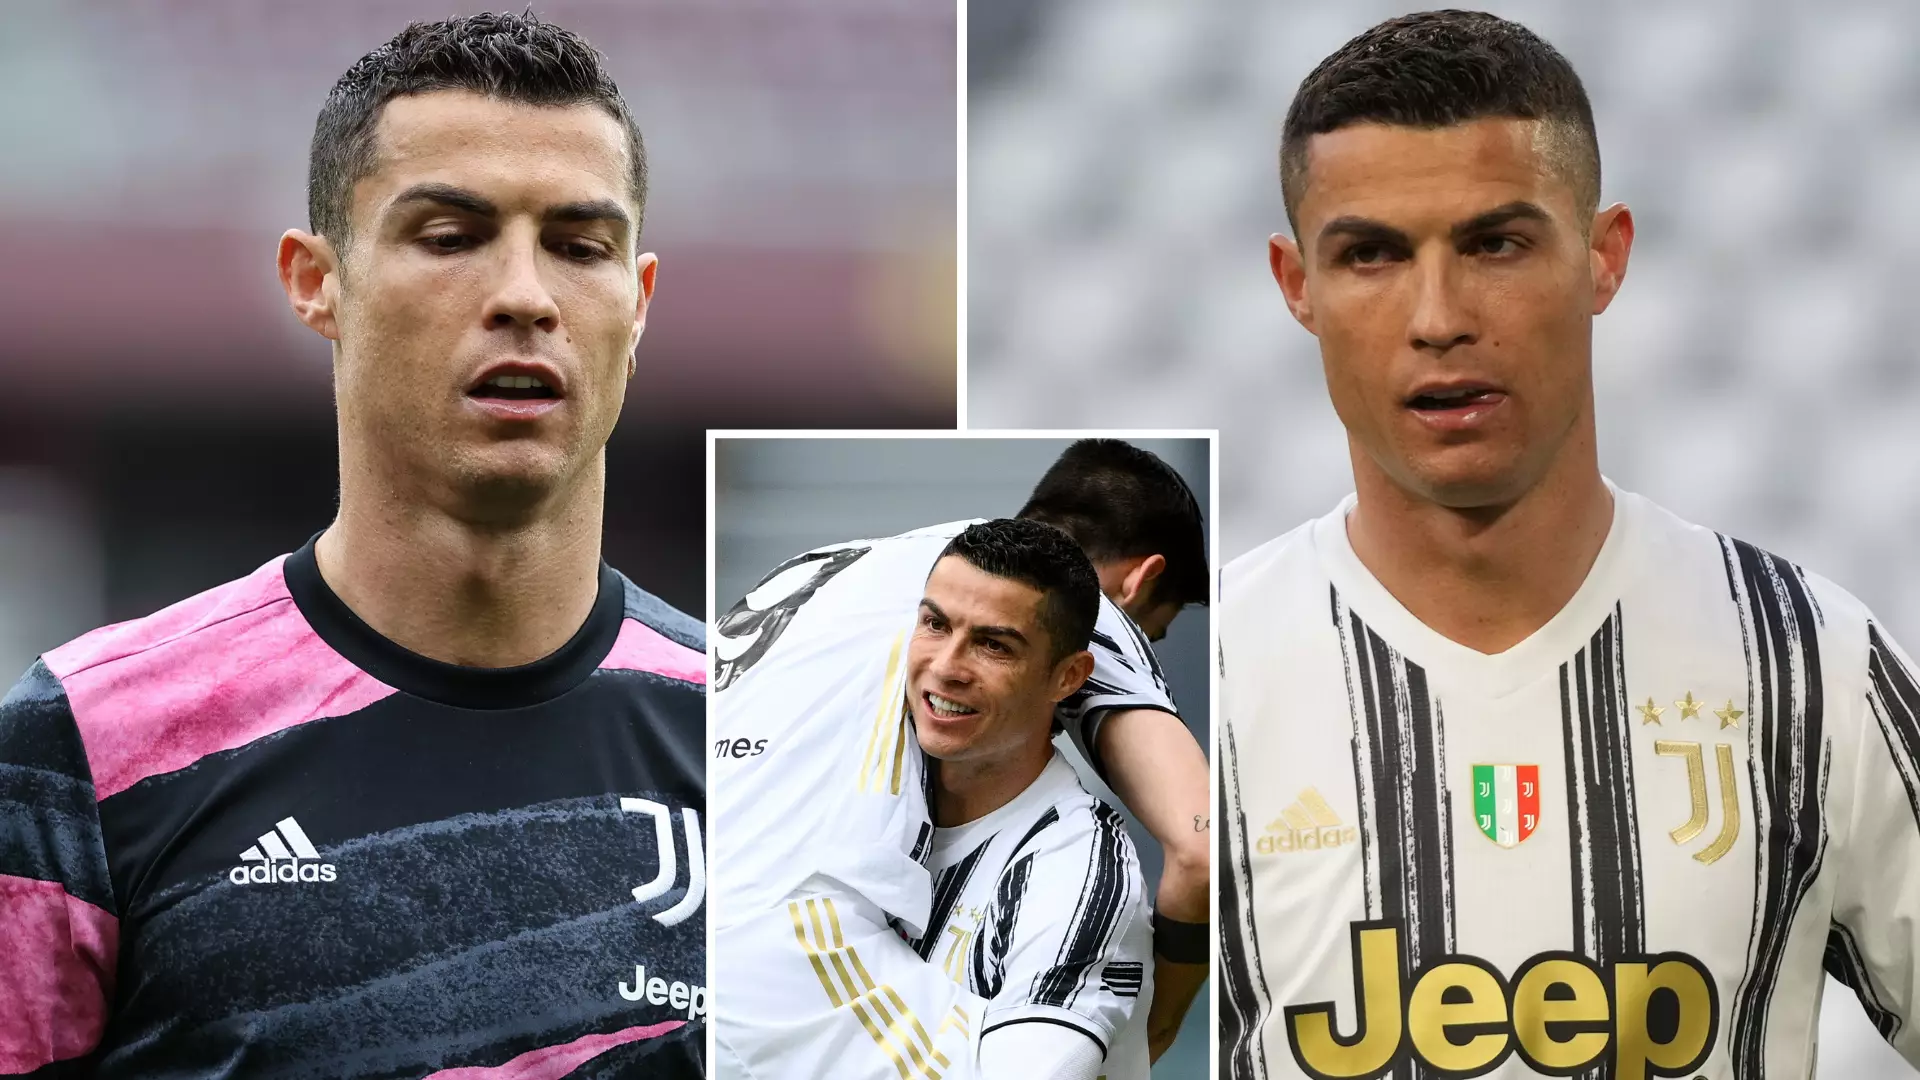 'Juventus Superstar Cristiano Ronaldo Has Never Been A Leader And Never Will Be'